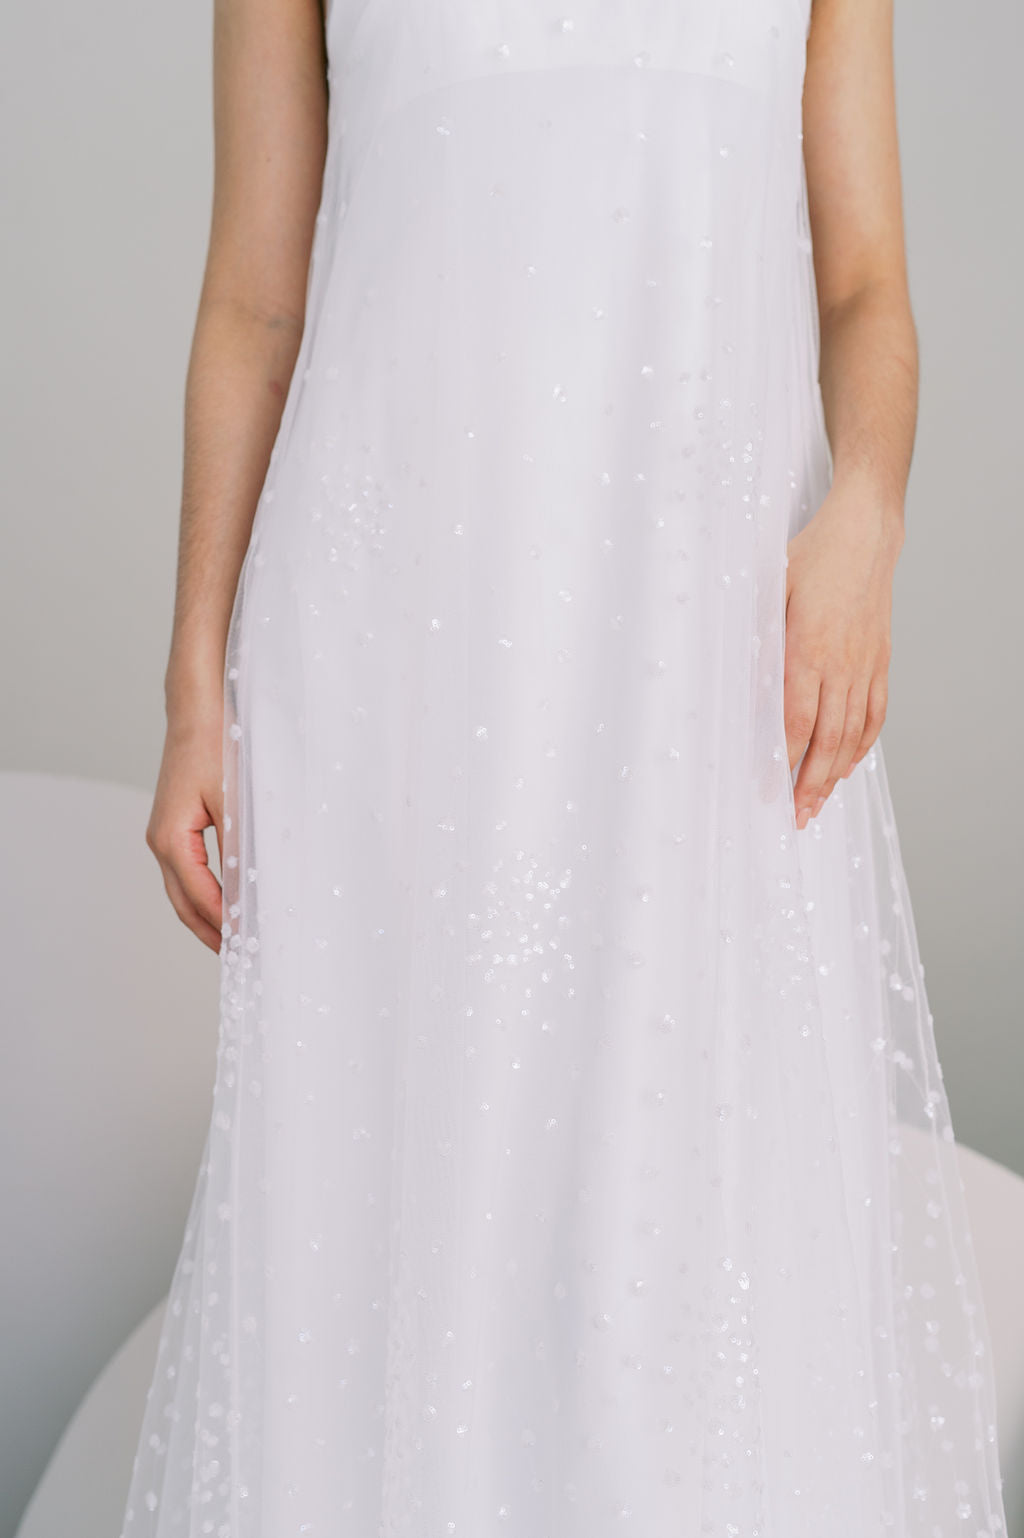 Bridal but make it fashion! Sheer sparkly tulle overdress, worn over a crepe slip. By Catherine Langlois, Toronto, Canada.